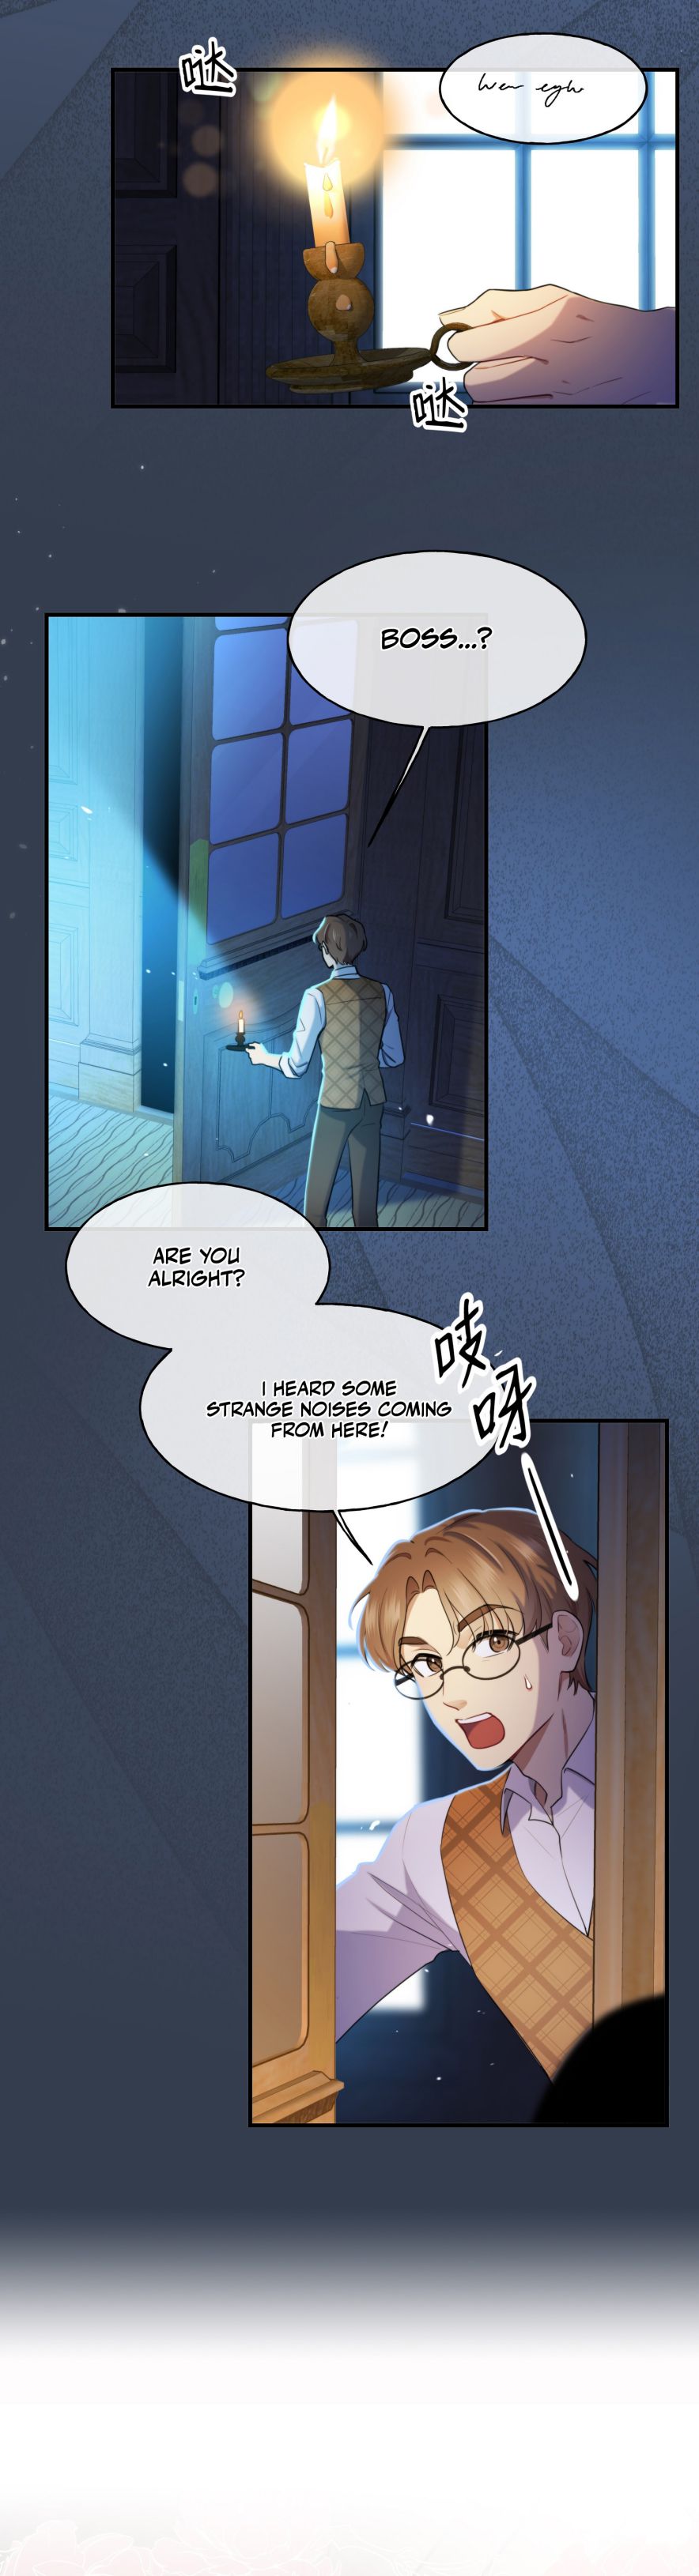 Infinite Escape: My Frightening Lover - Page 2